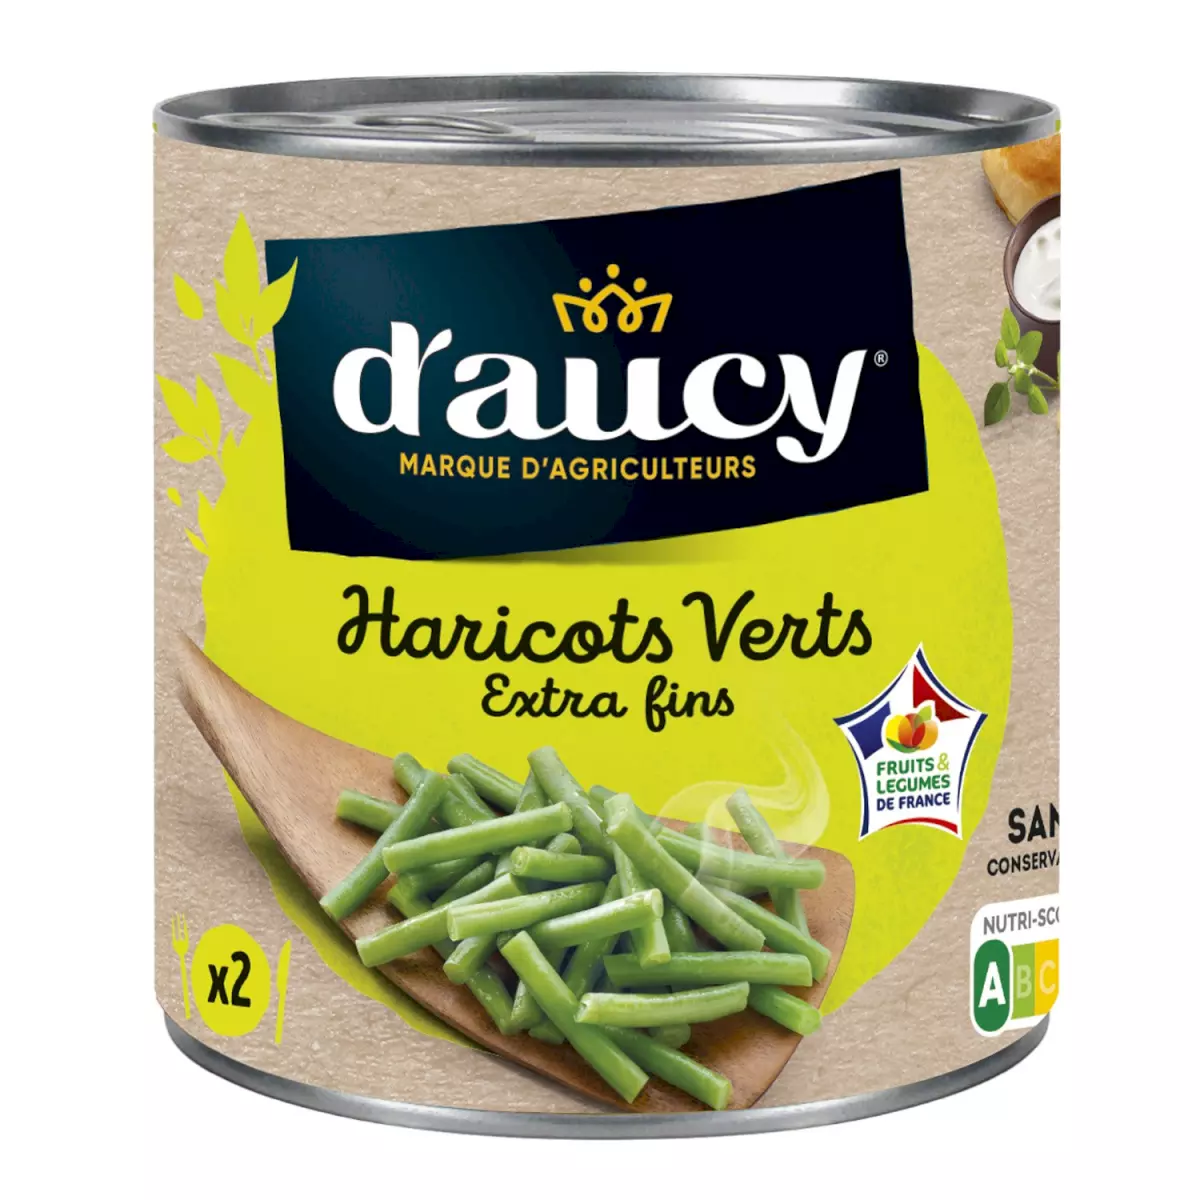 HARICOTS VERTS EXTRA FINS BTE 1/2 DAUCY